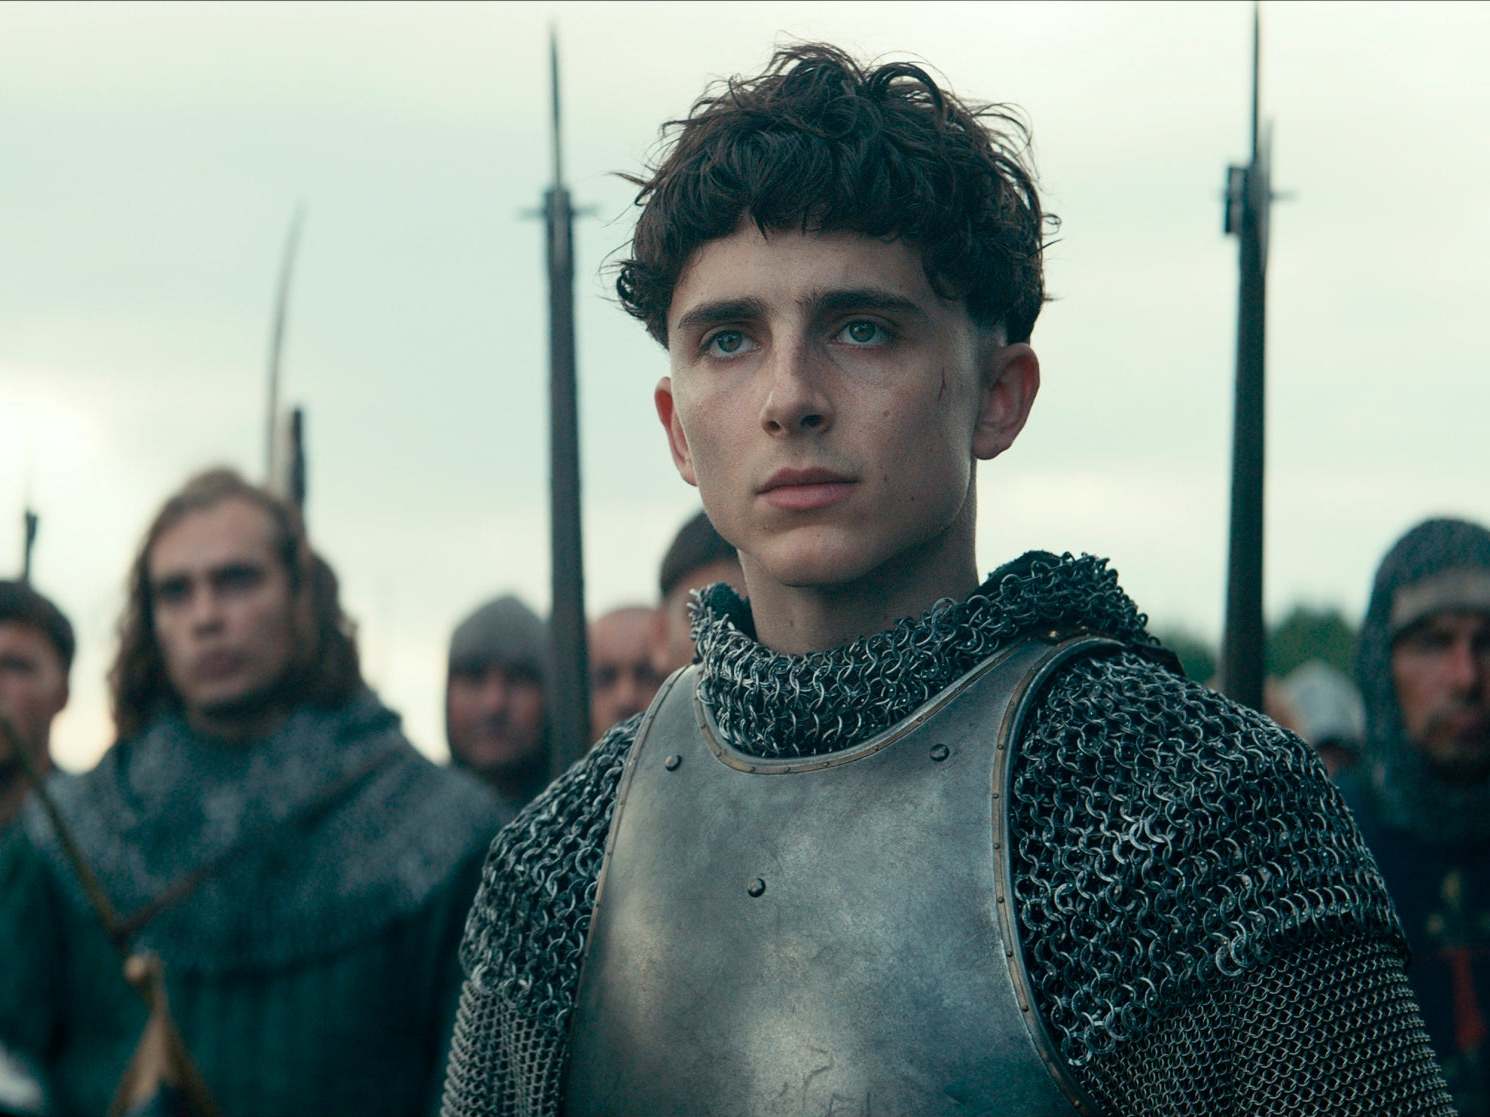 The King review: Timothée Chalamet stars in an exhaustingly solemn take on Shakespeare